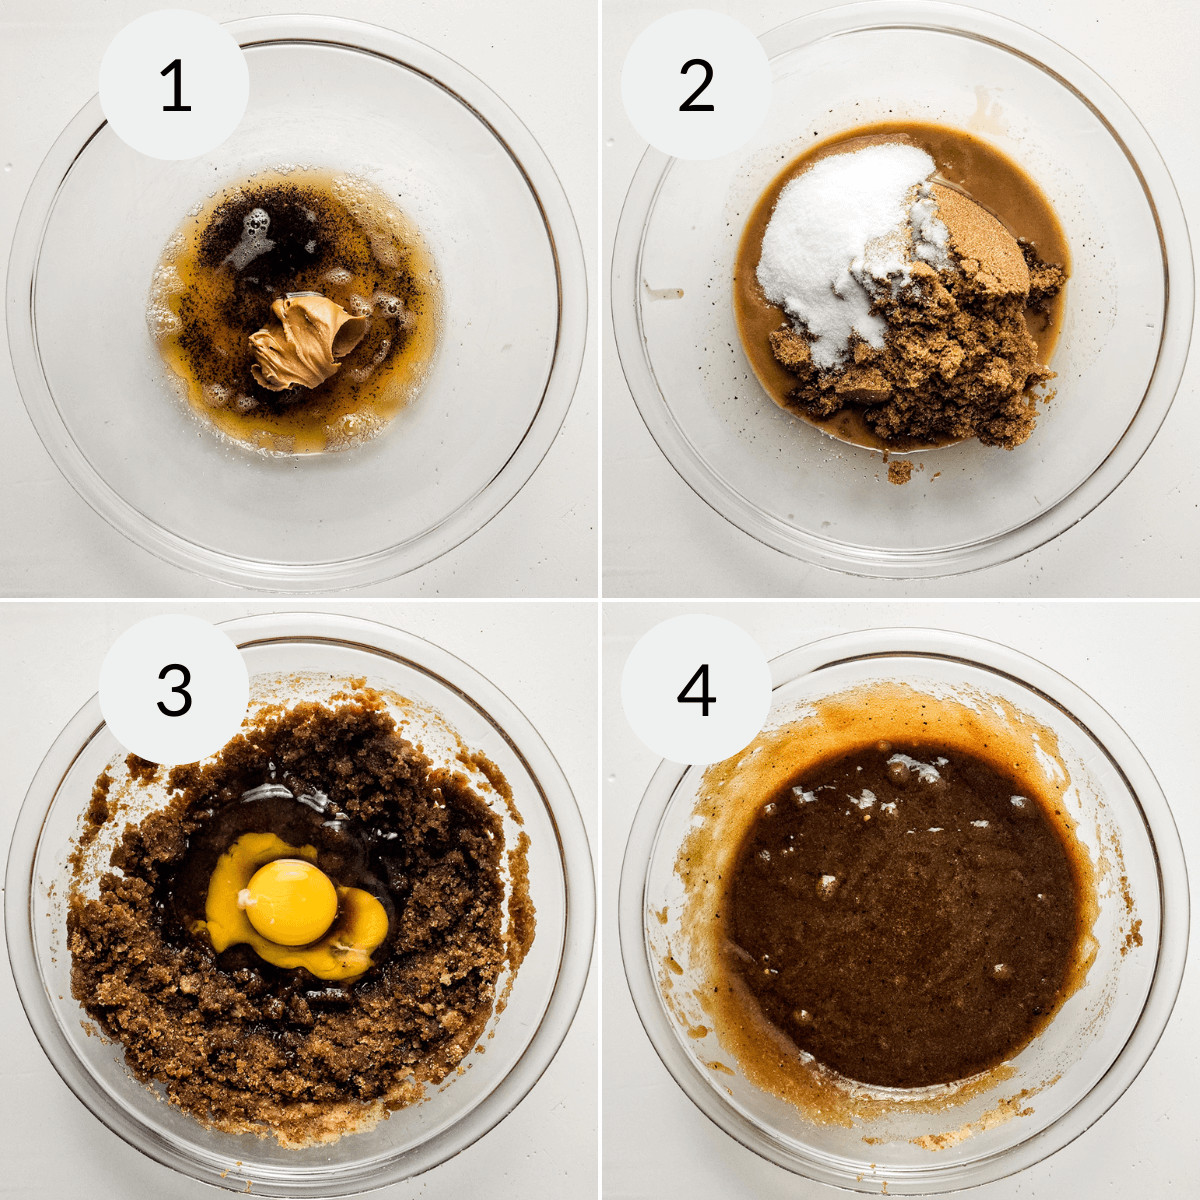 Four-step sequence of making biscoff brownie batter: 1) mixing wet ingredients, 2) adding dry ingredients, 3) incorporating eggs, 4) final smooth batter in bowls